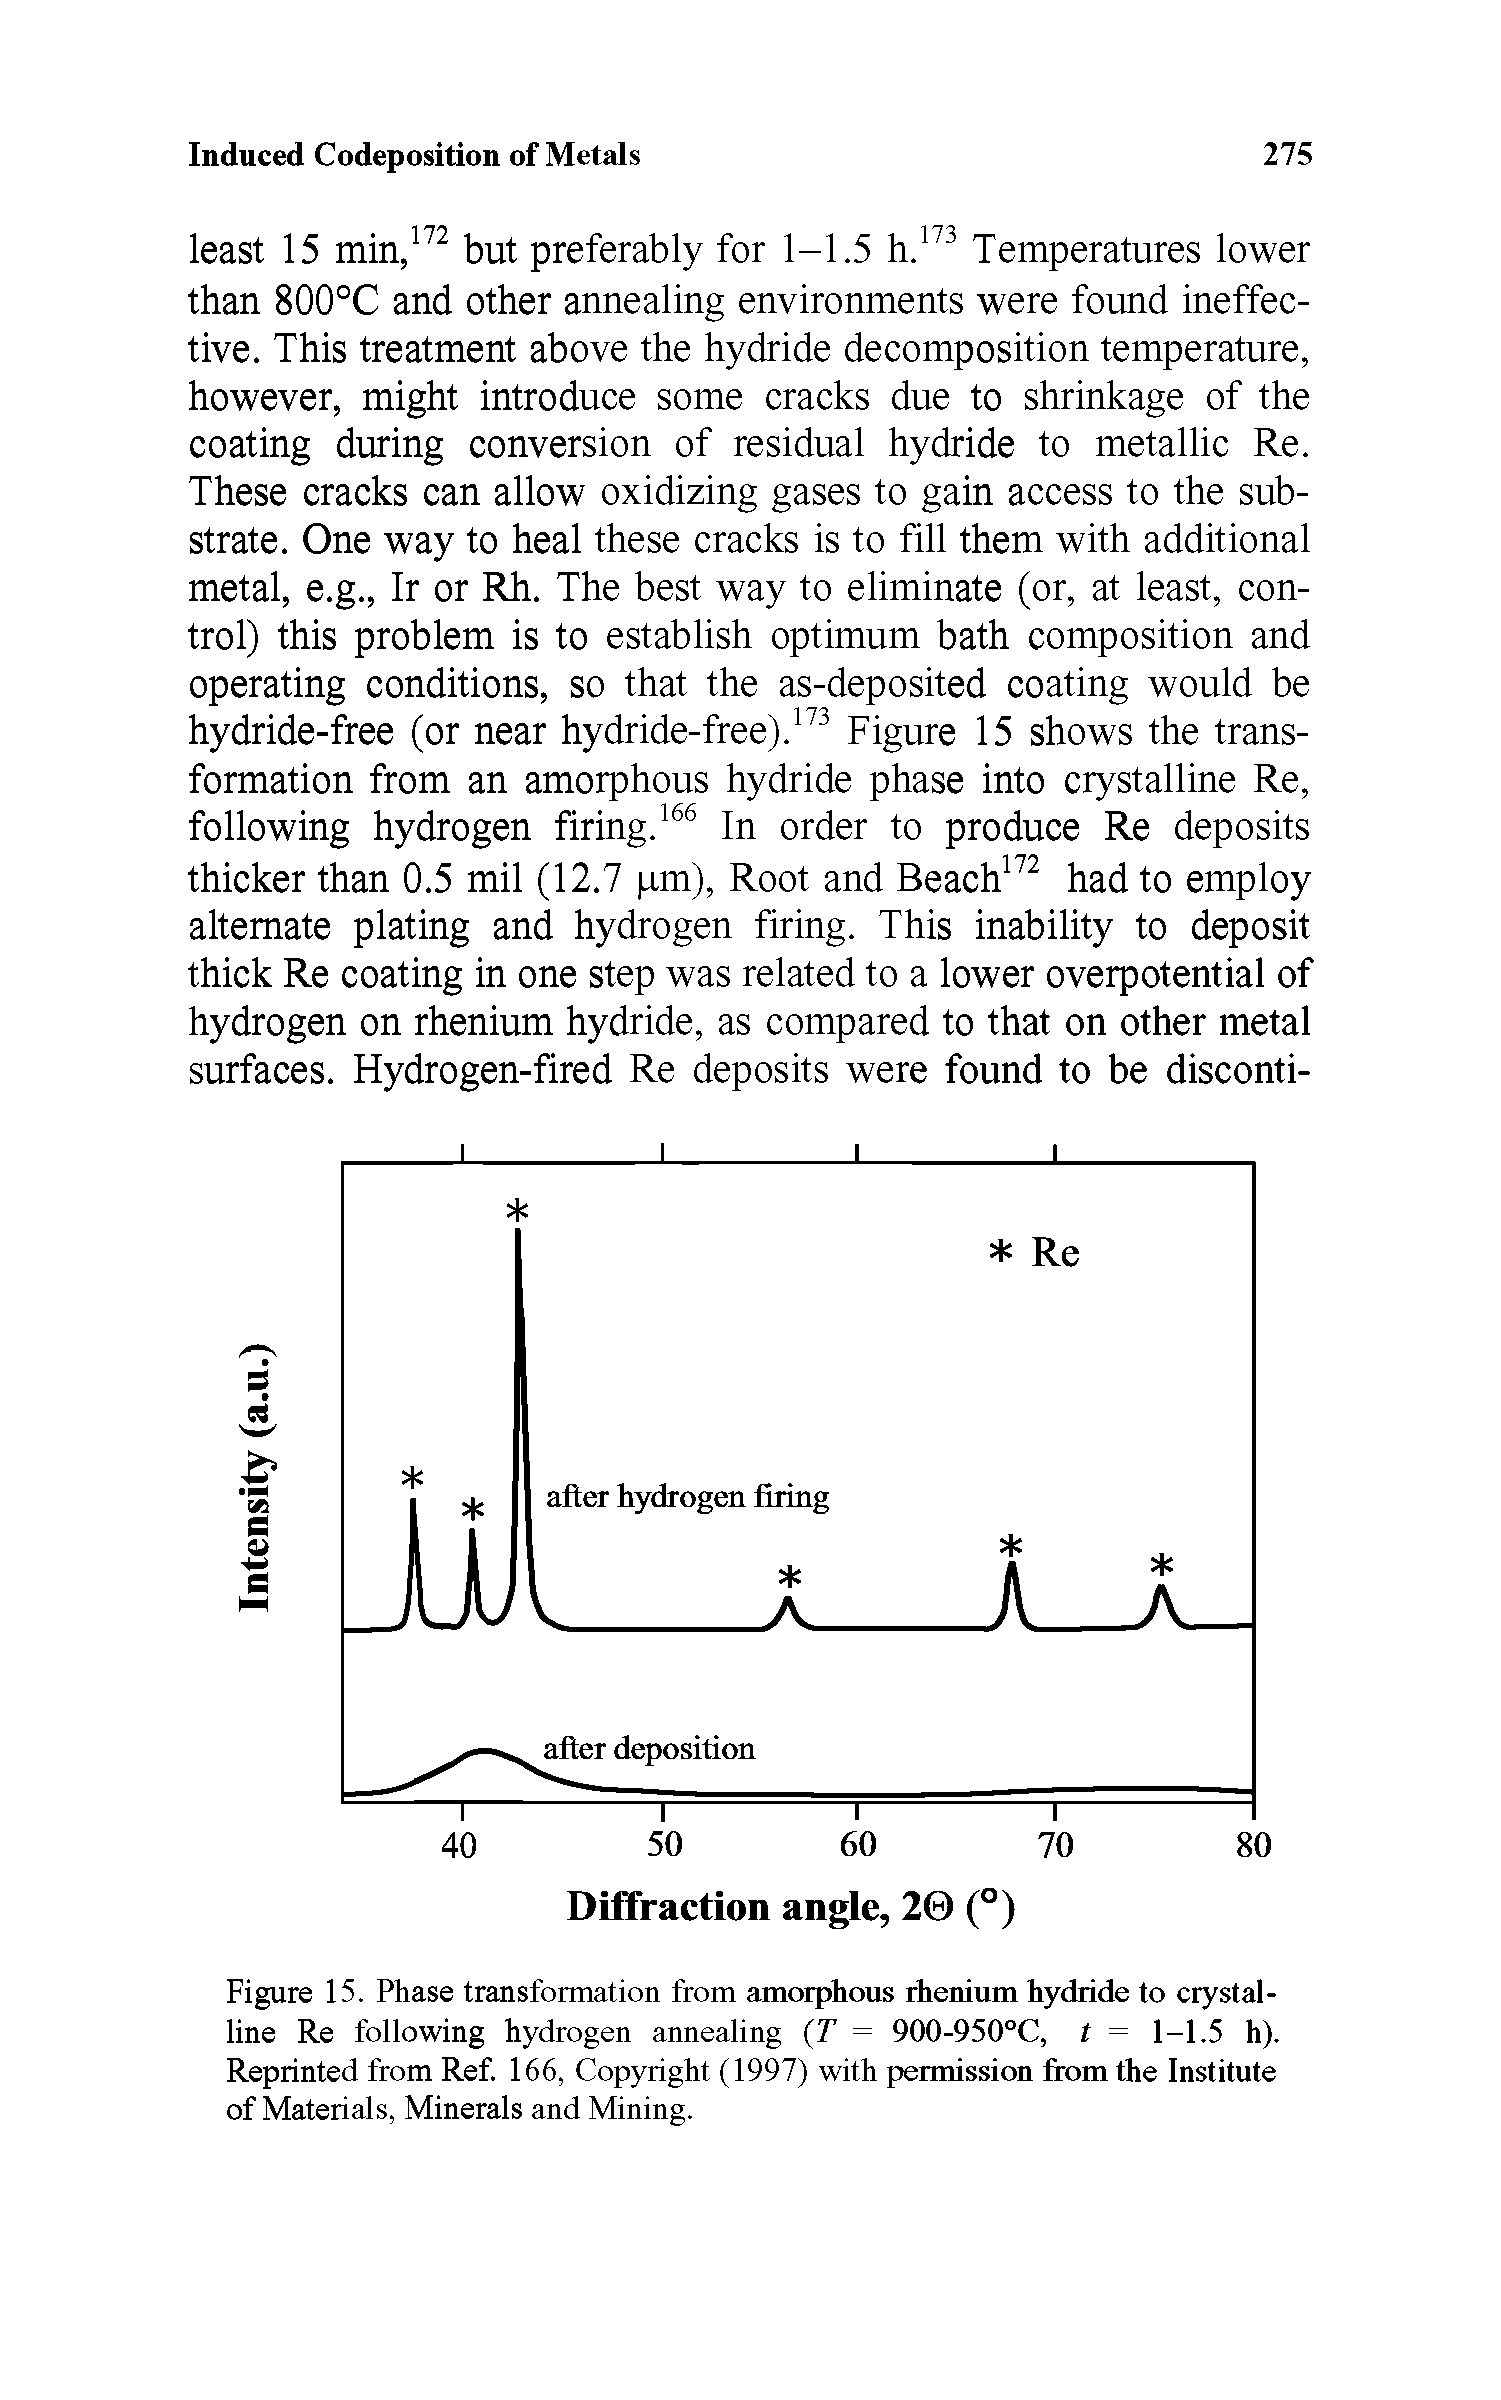 Figure 15. Phase transformation from amorphous rhenium hydride to crystalline Re following hydrogen annealing (T = 900-950°C, t = 1-1.5 h). Reprinted from Ref. 166, Copyright (1997) with permission from the Institute of Materials, Minerals and Mining.